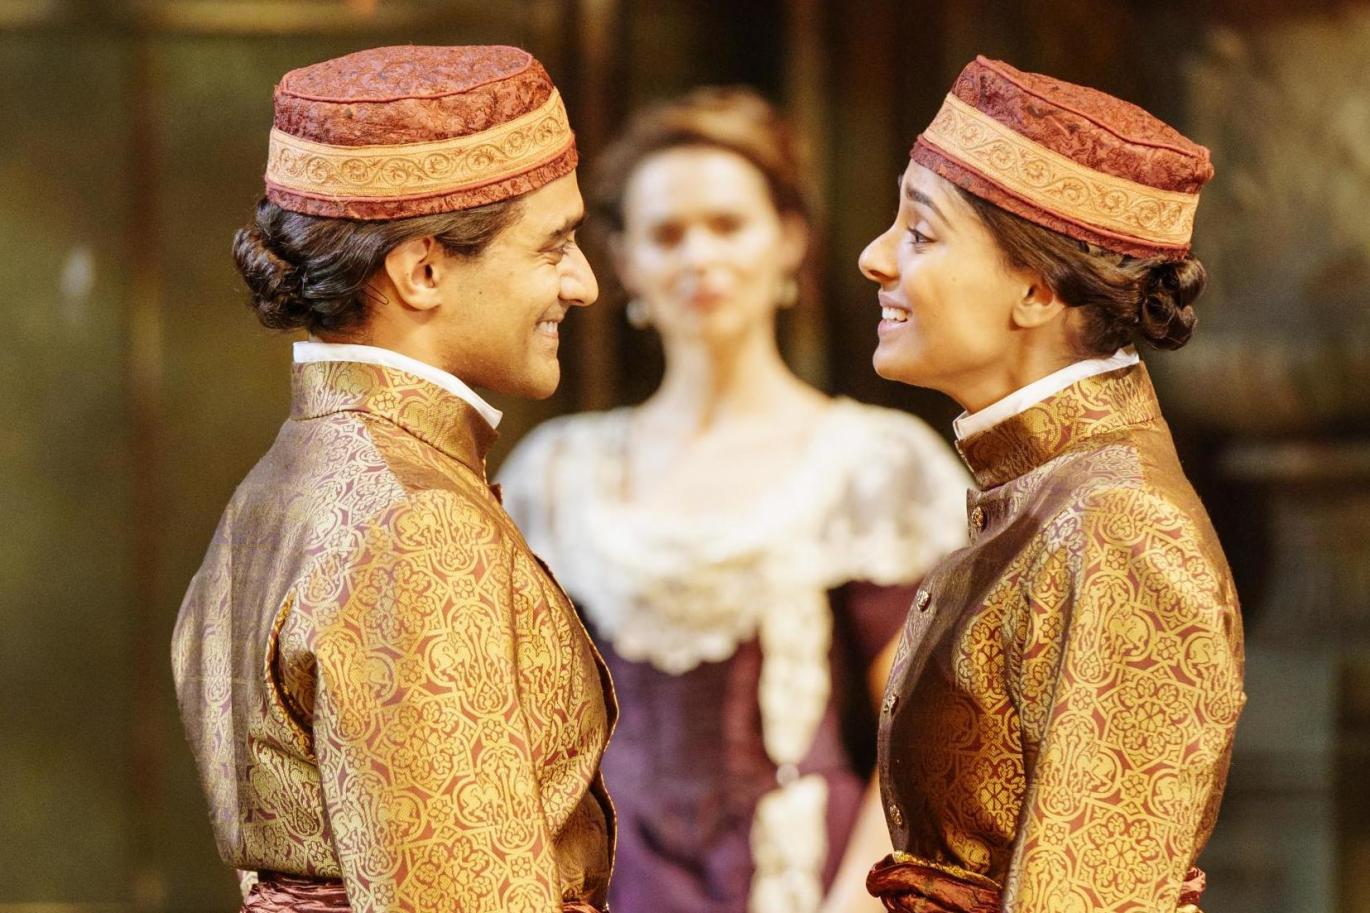 How Does Twelfth Night Explore Gender Roles and Identity?